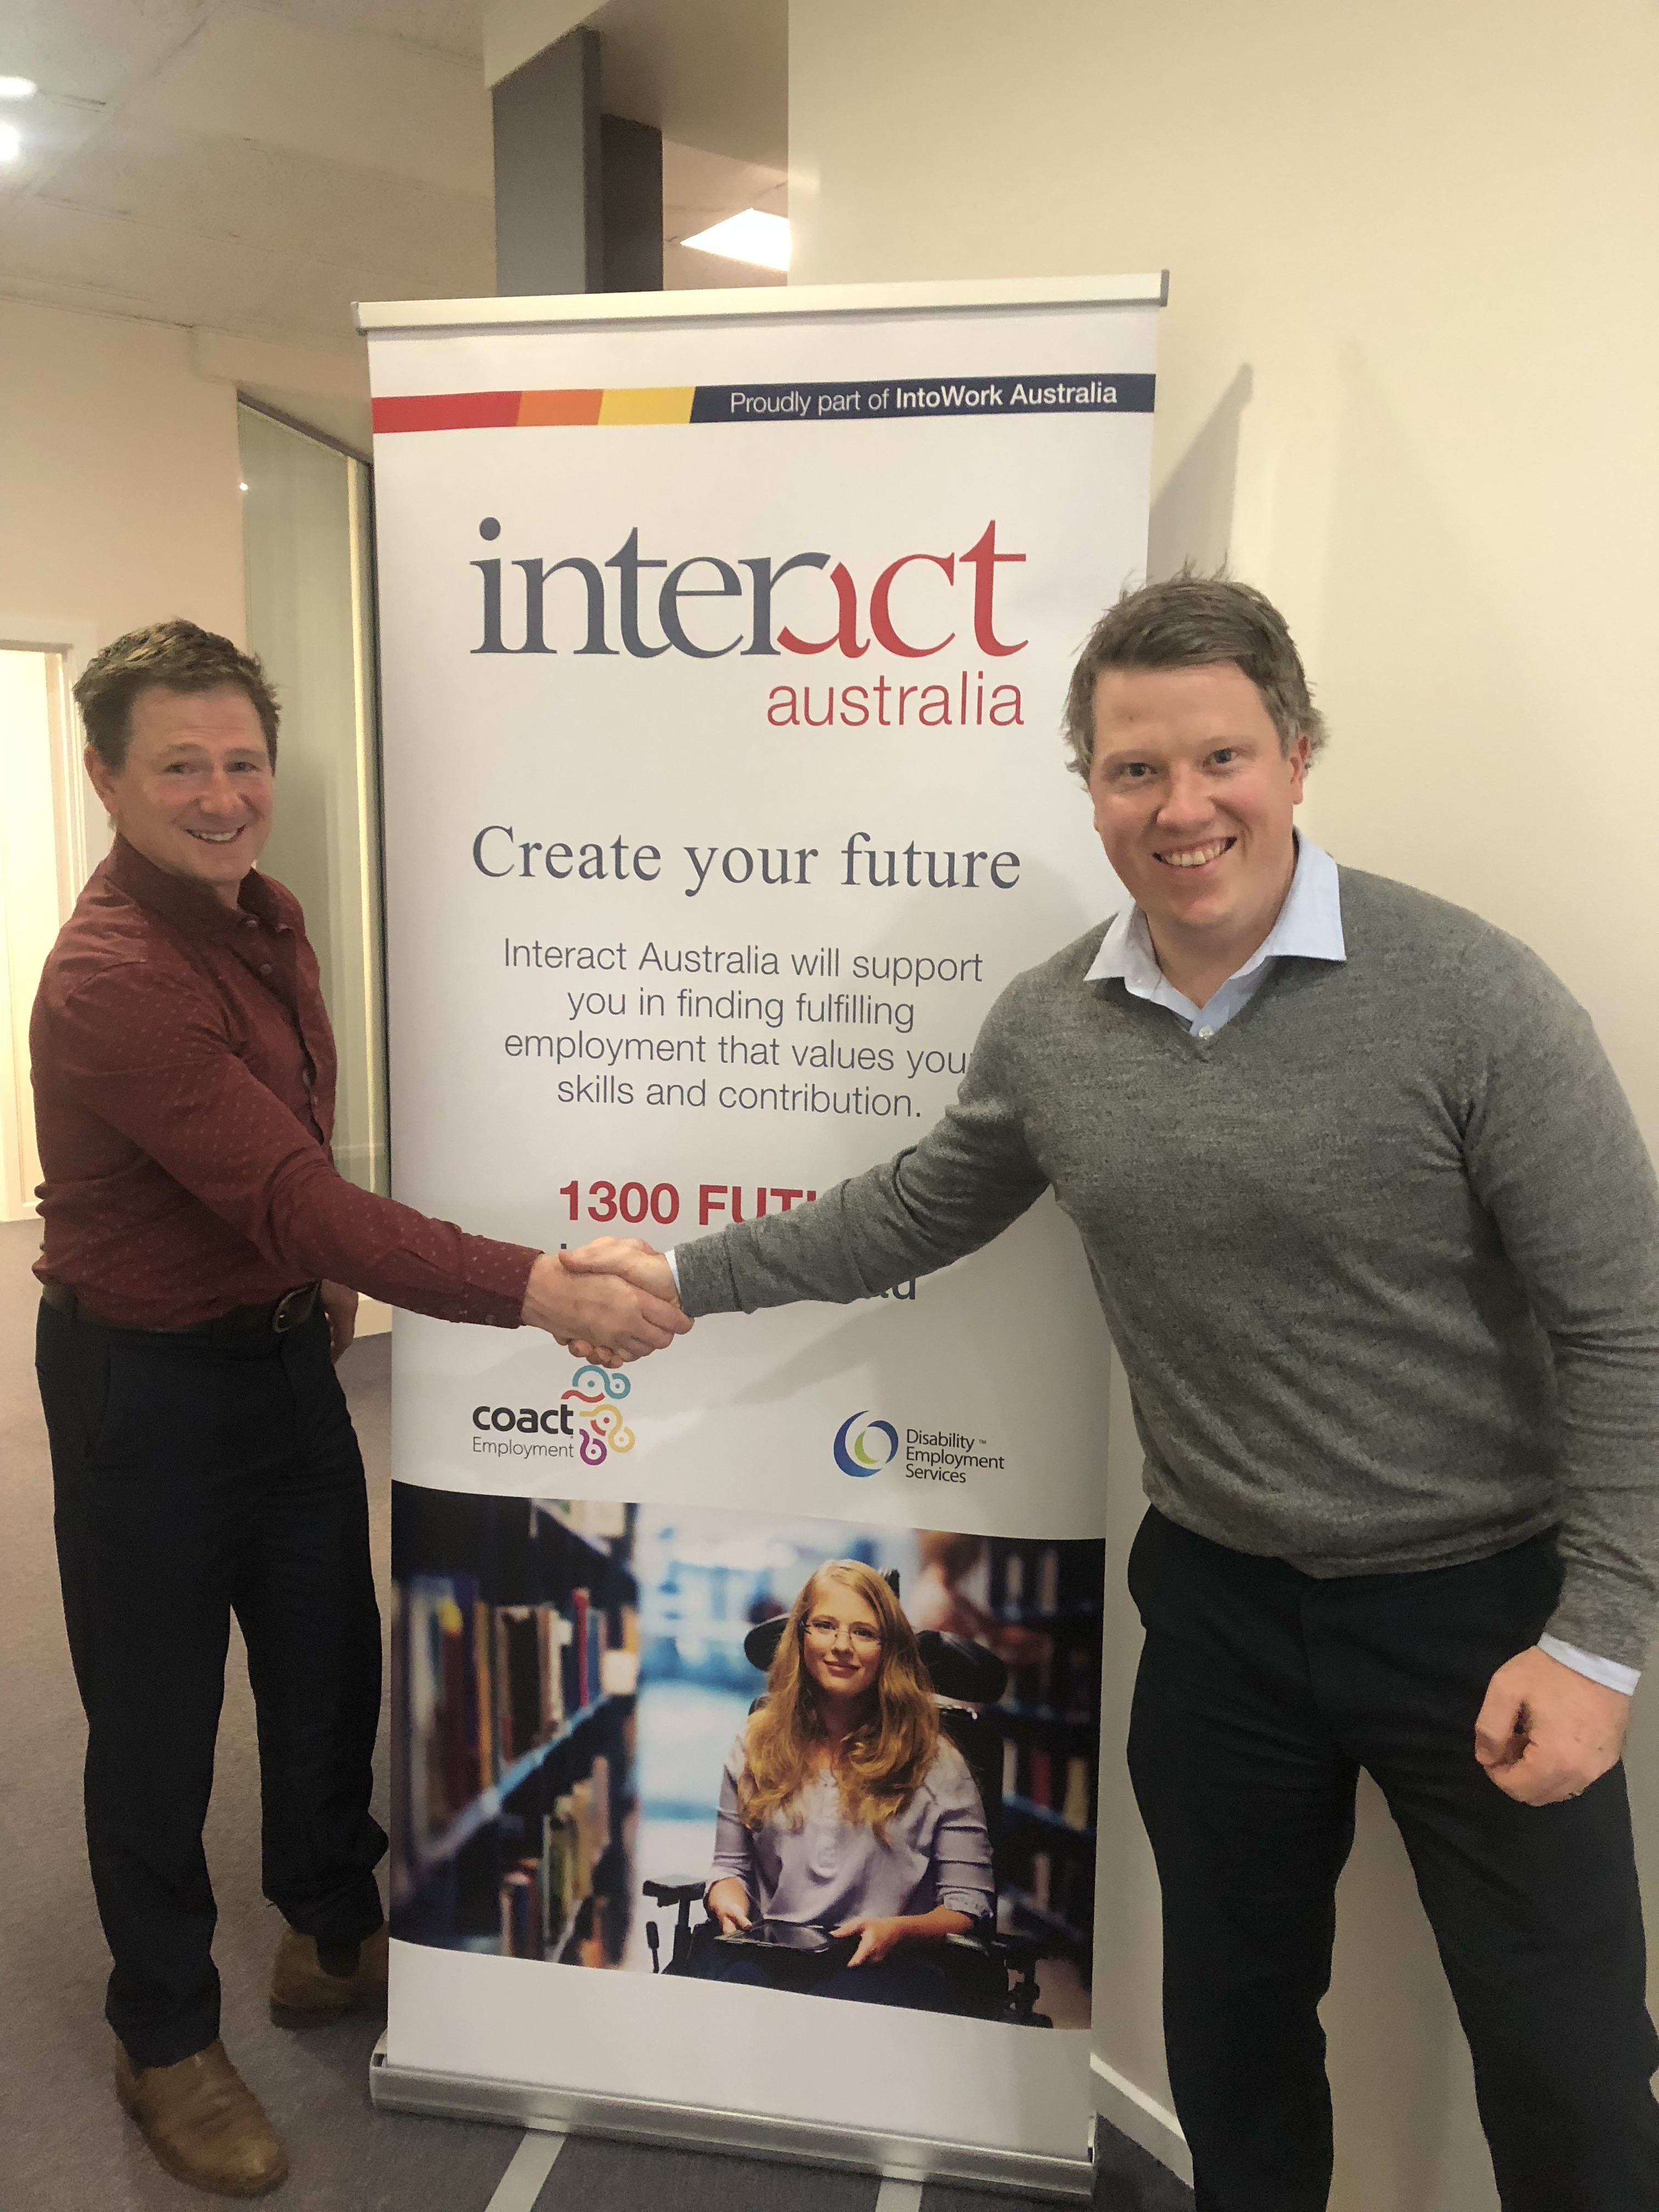 Matthew Dance, Employer Services Manager At Workskil, And Darryn Perry, Performance & Partnership Leader At Interact Australia, Pictured Shaking Hands To Celebrate Their Partnership Agreement Between Both Organisations.